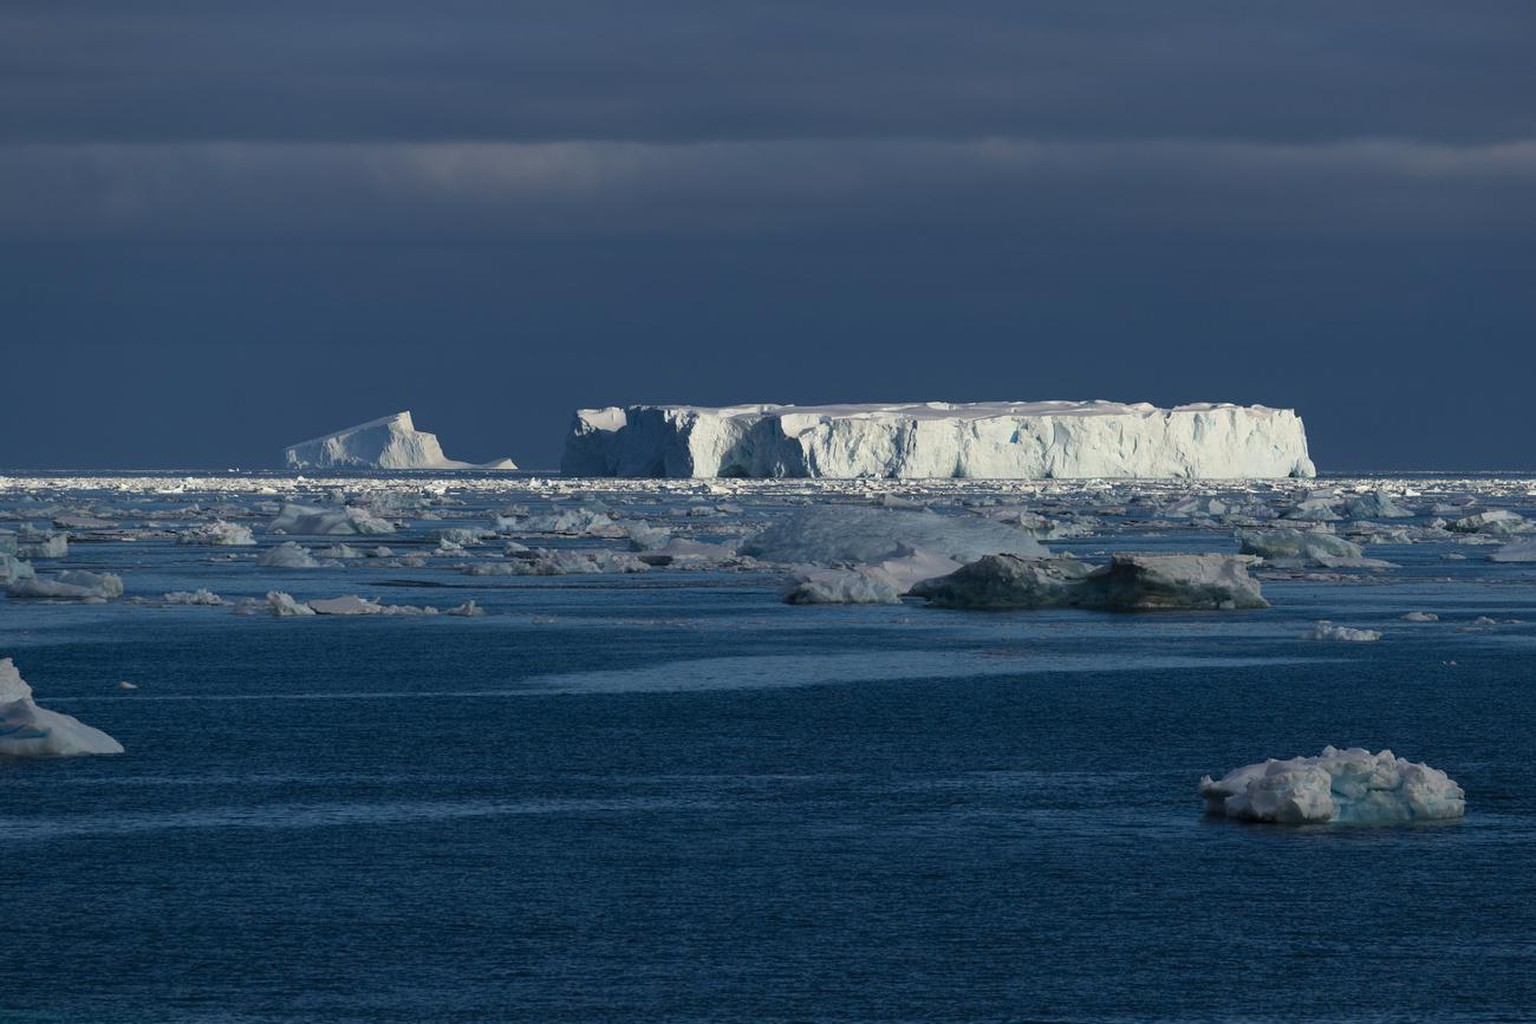 Sunlight hits an iceberg in the water on Thursday, March 7, 2019 in Crystal Sound, Antarctica. (Ric Tapia via AP)